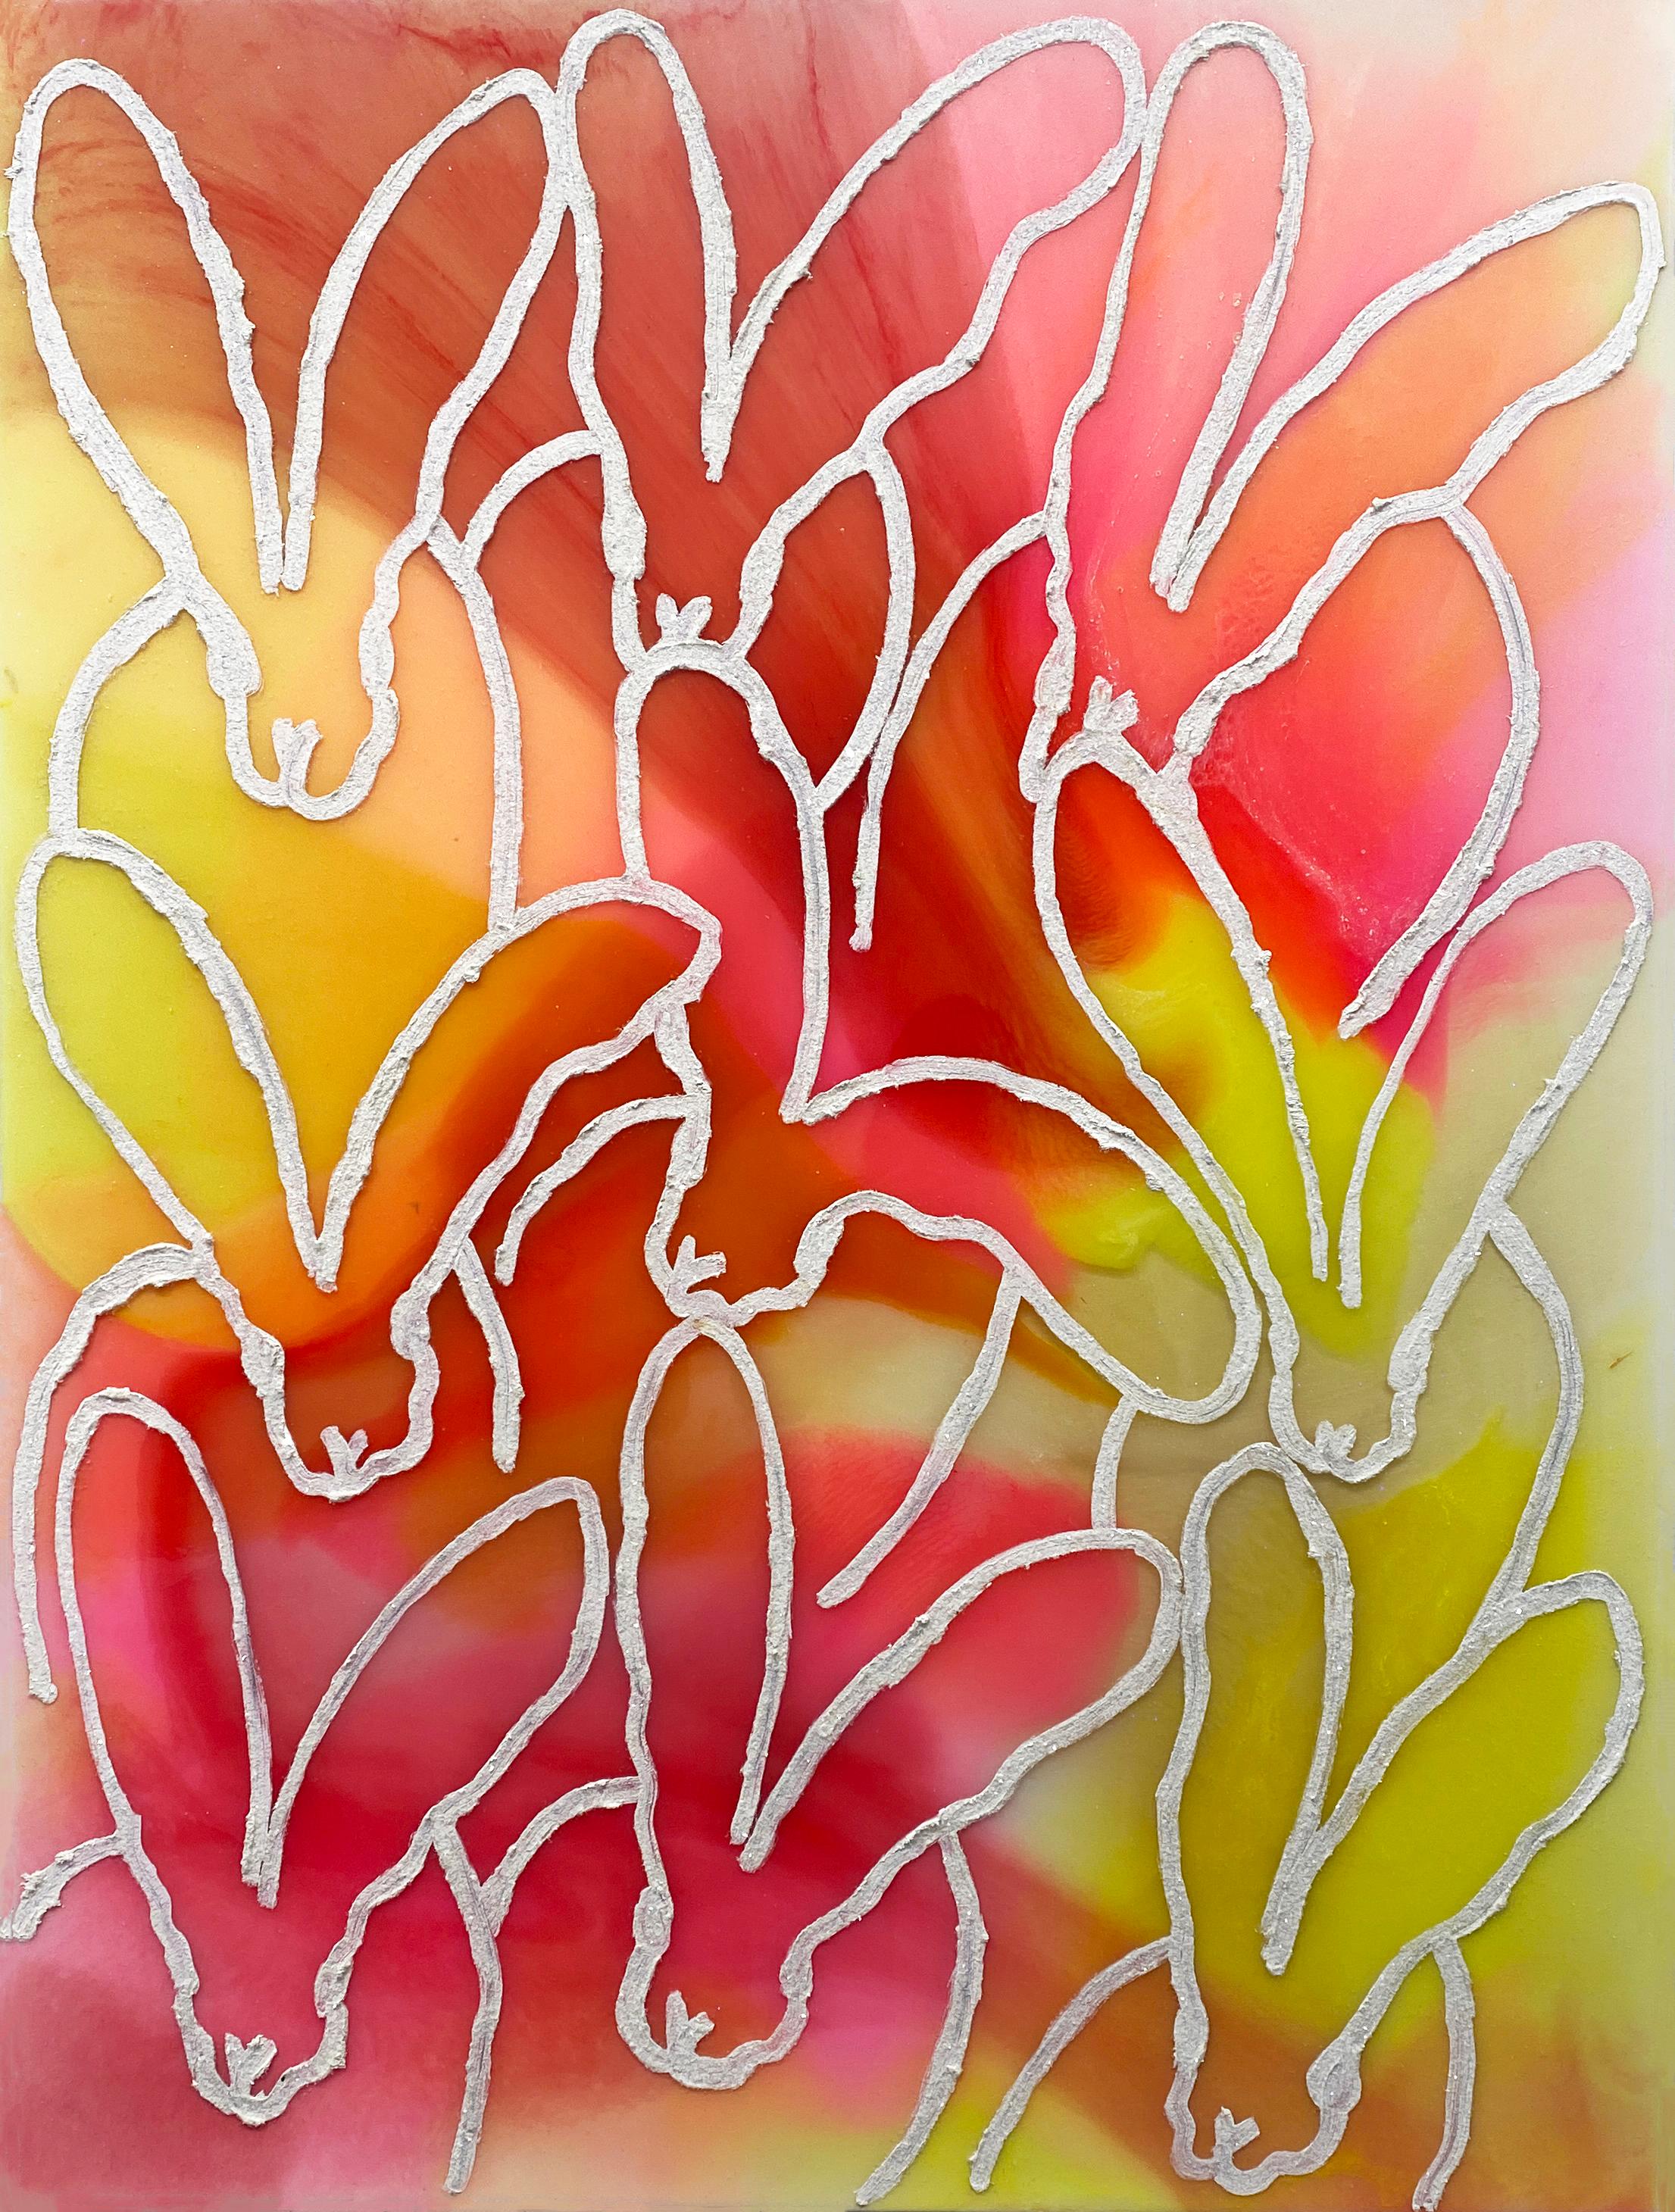 Available at Madelyn Jordon Fine Art. 'Glisten 3' by Hunt Slonem, 2023. Oil on canvas, 40 x 30 in. This painting features Slonem's signature bunnies outlined in white over swirling strokes of pink, red, yellow, and orange.

Considered one of the